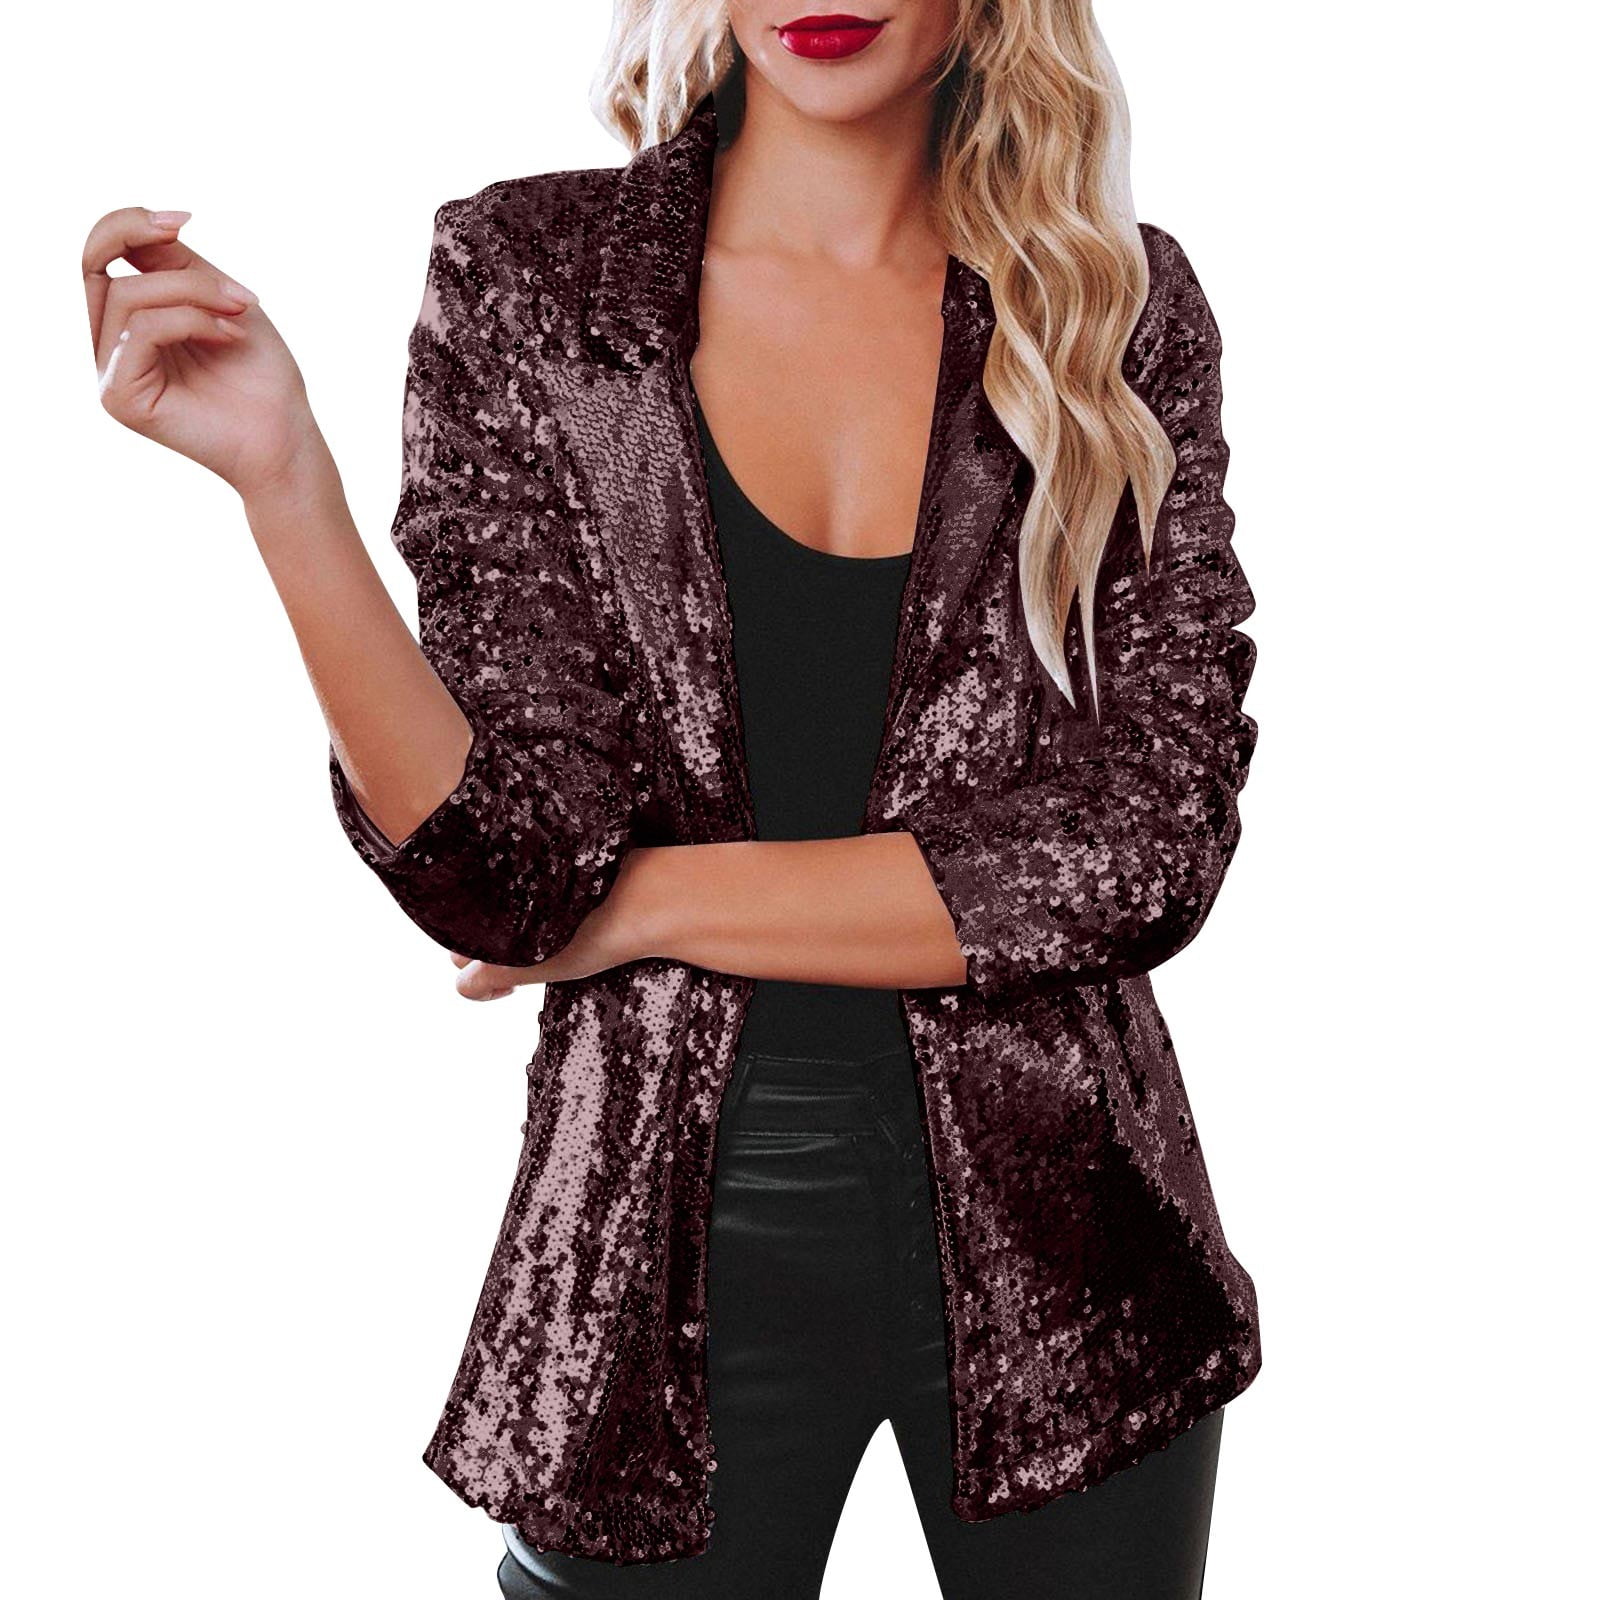 PMUYBHF Womens Fashion Jackets Women Sequins Sequin Jacket Casual Long  Sleeve Glitter Party Shiny Lapel Coat Rave Outerwear 